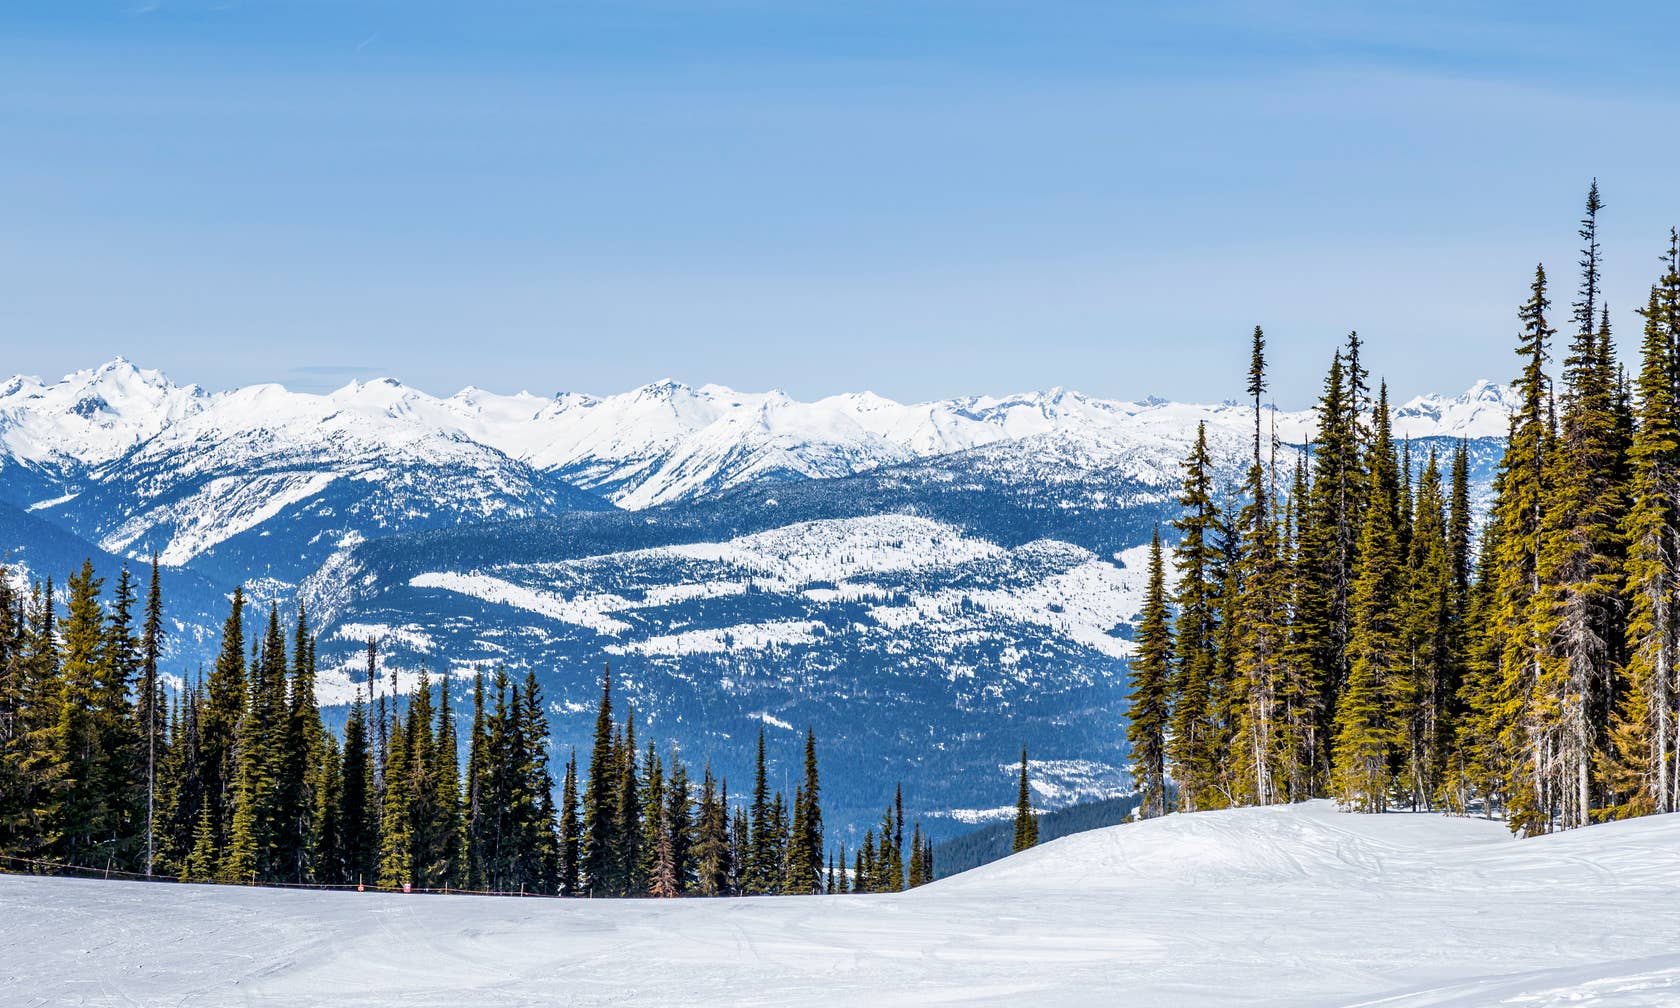 Holiday rentals in Big White Mountain